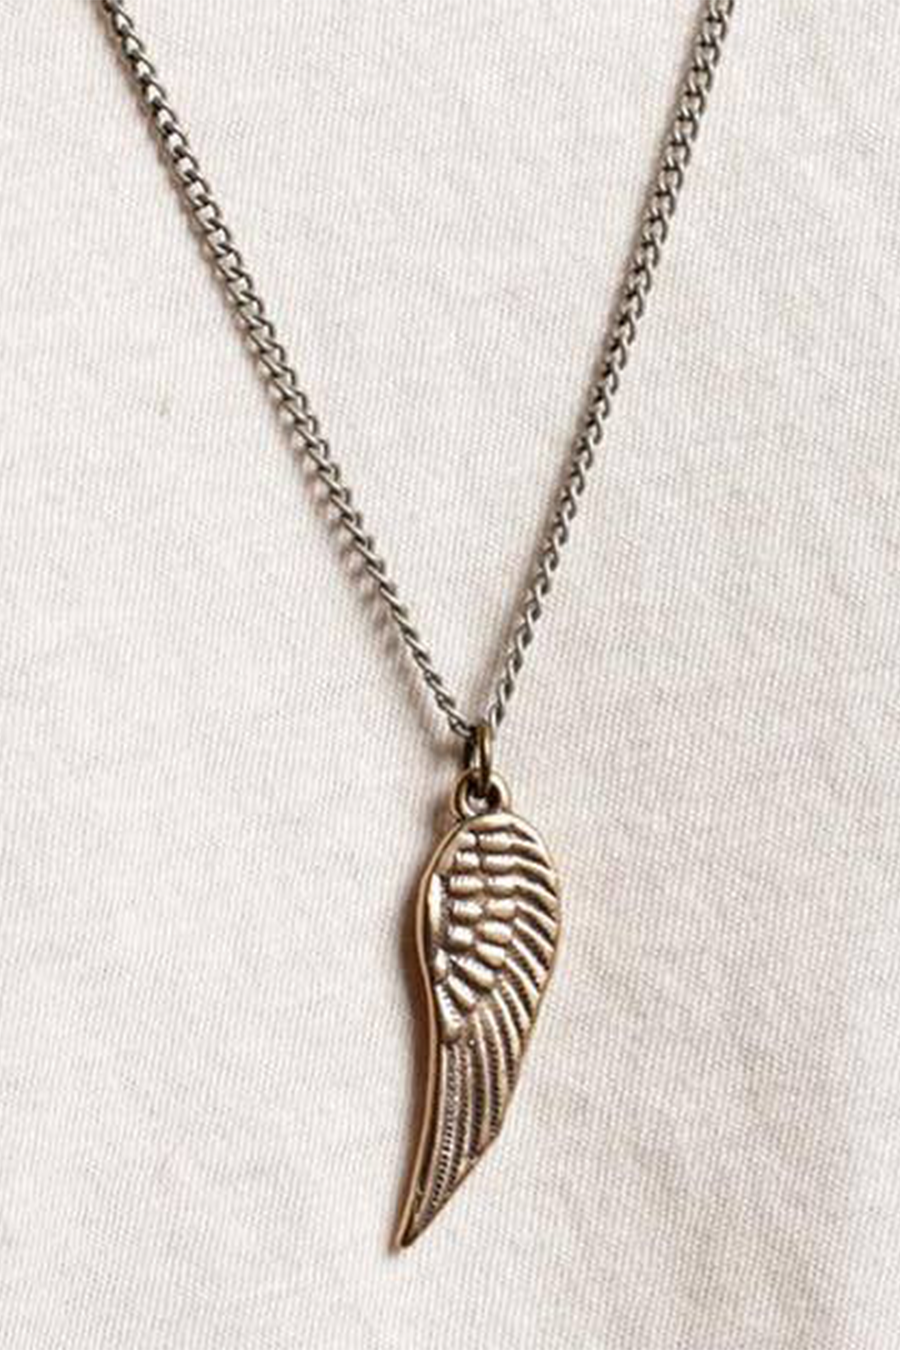 Wings Necklace - Main Image Number 1 of 2